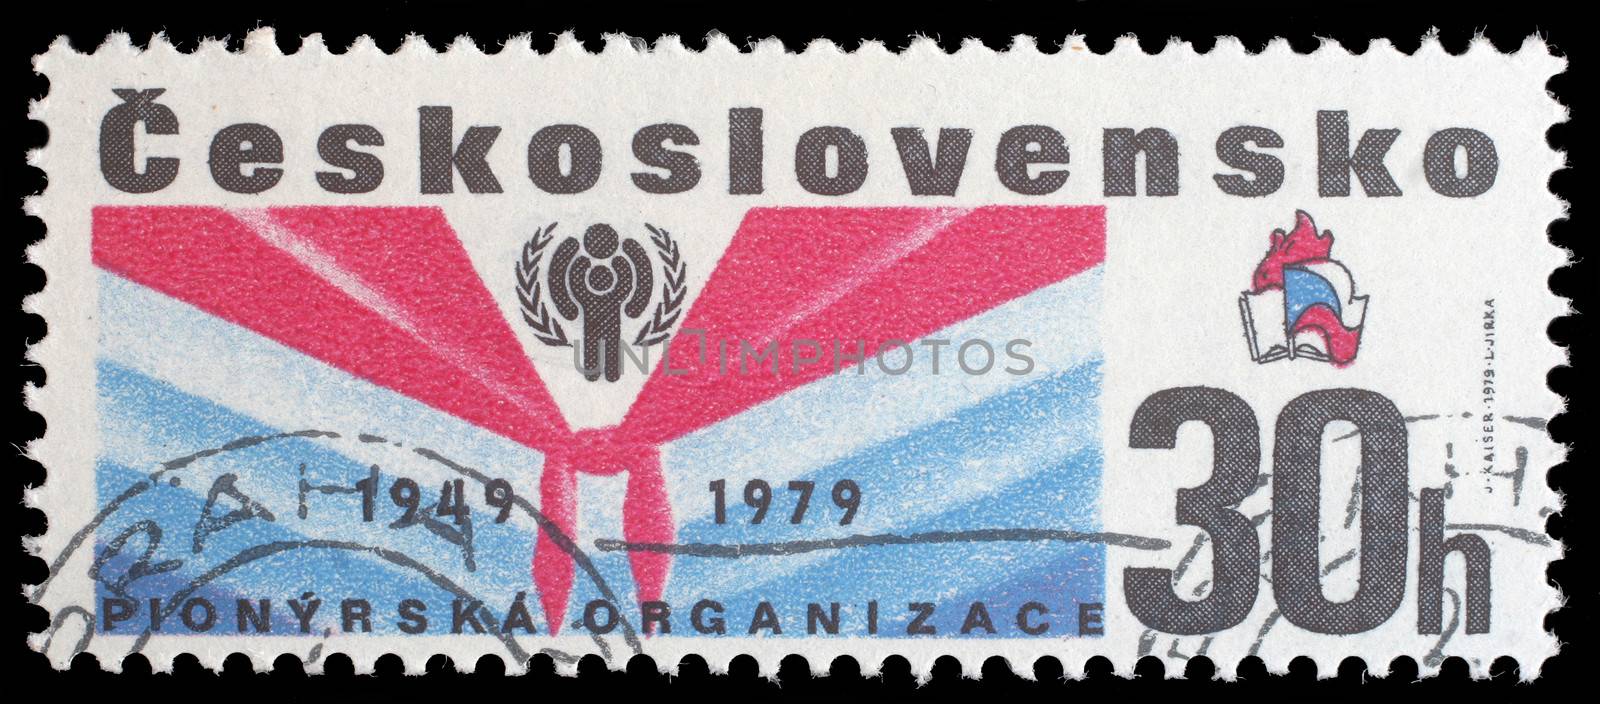 Stamp from Czechoslovakia shows image commemorating the 30th anniversary of the Pioneer movement for children in Czechoslovakia by atlas